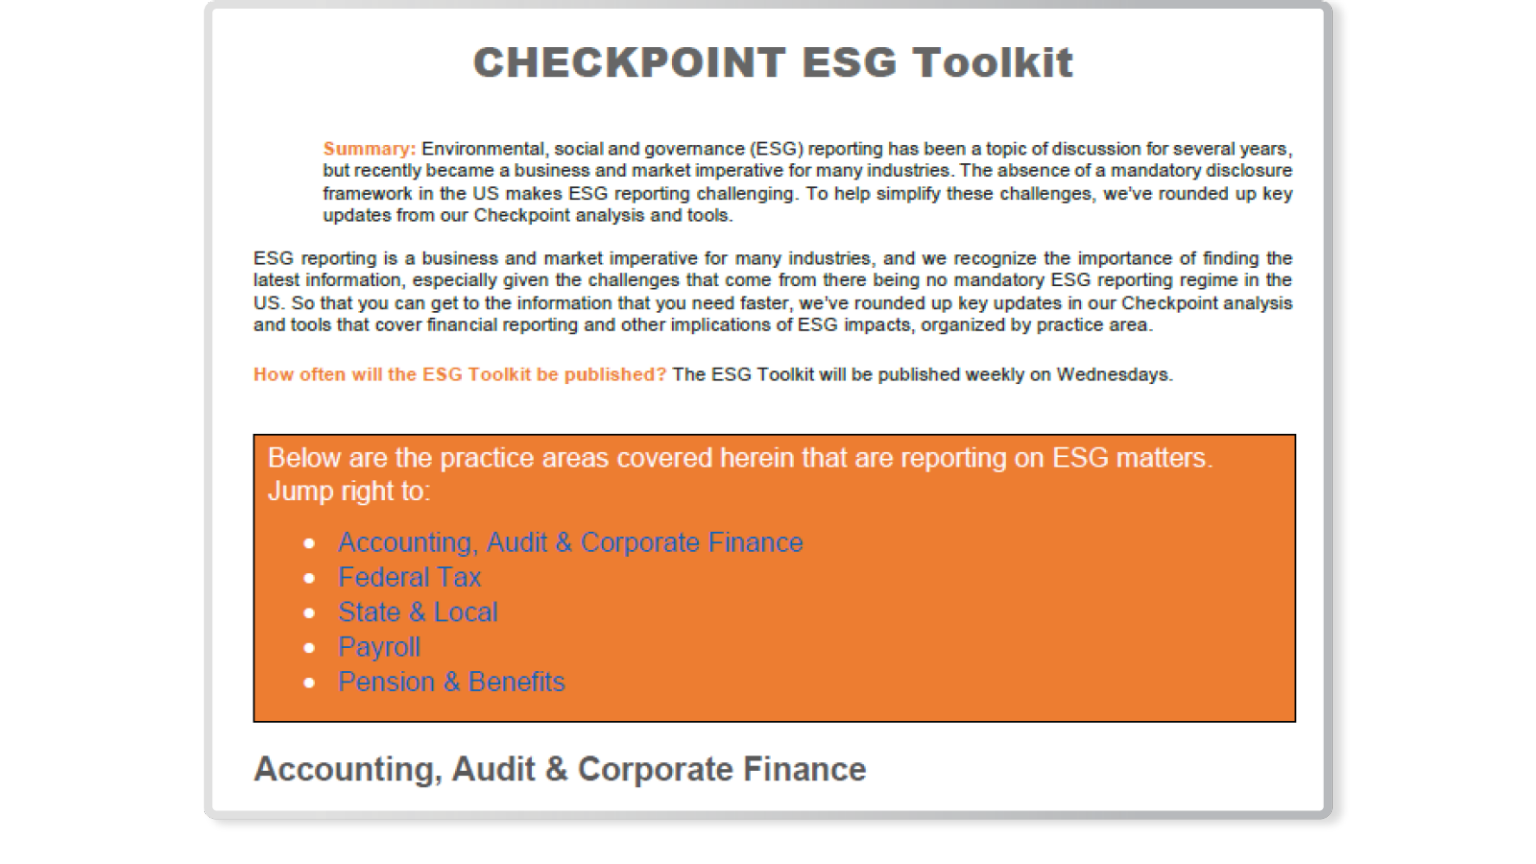 Description of the Checkpoint ESG Toolkit helps businesses.